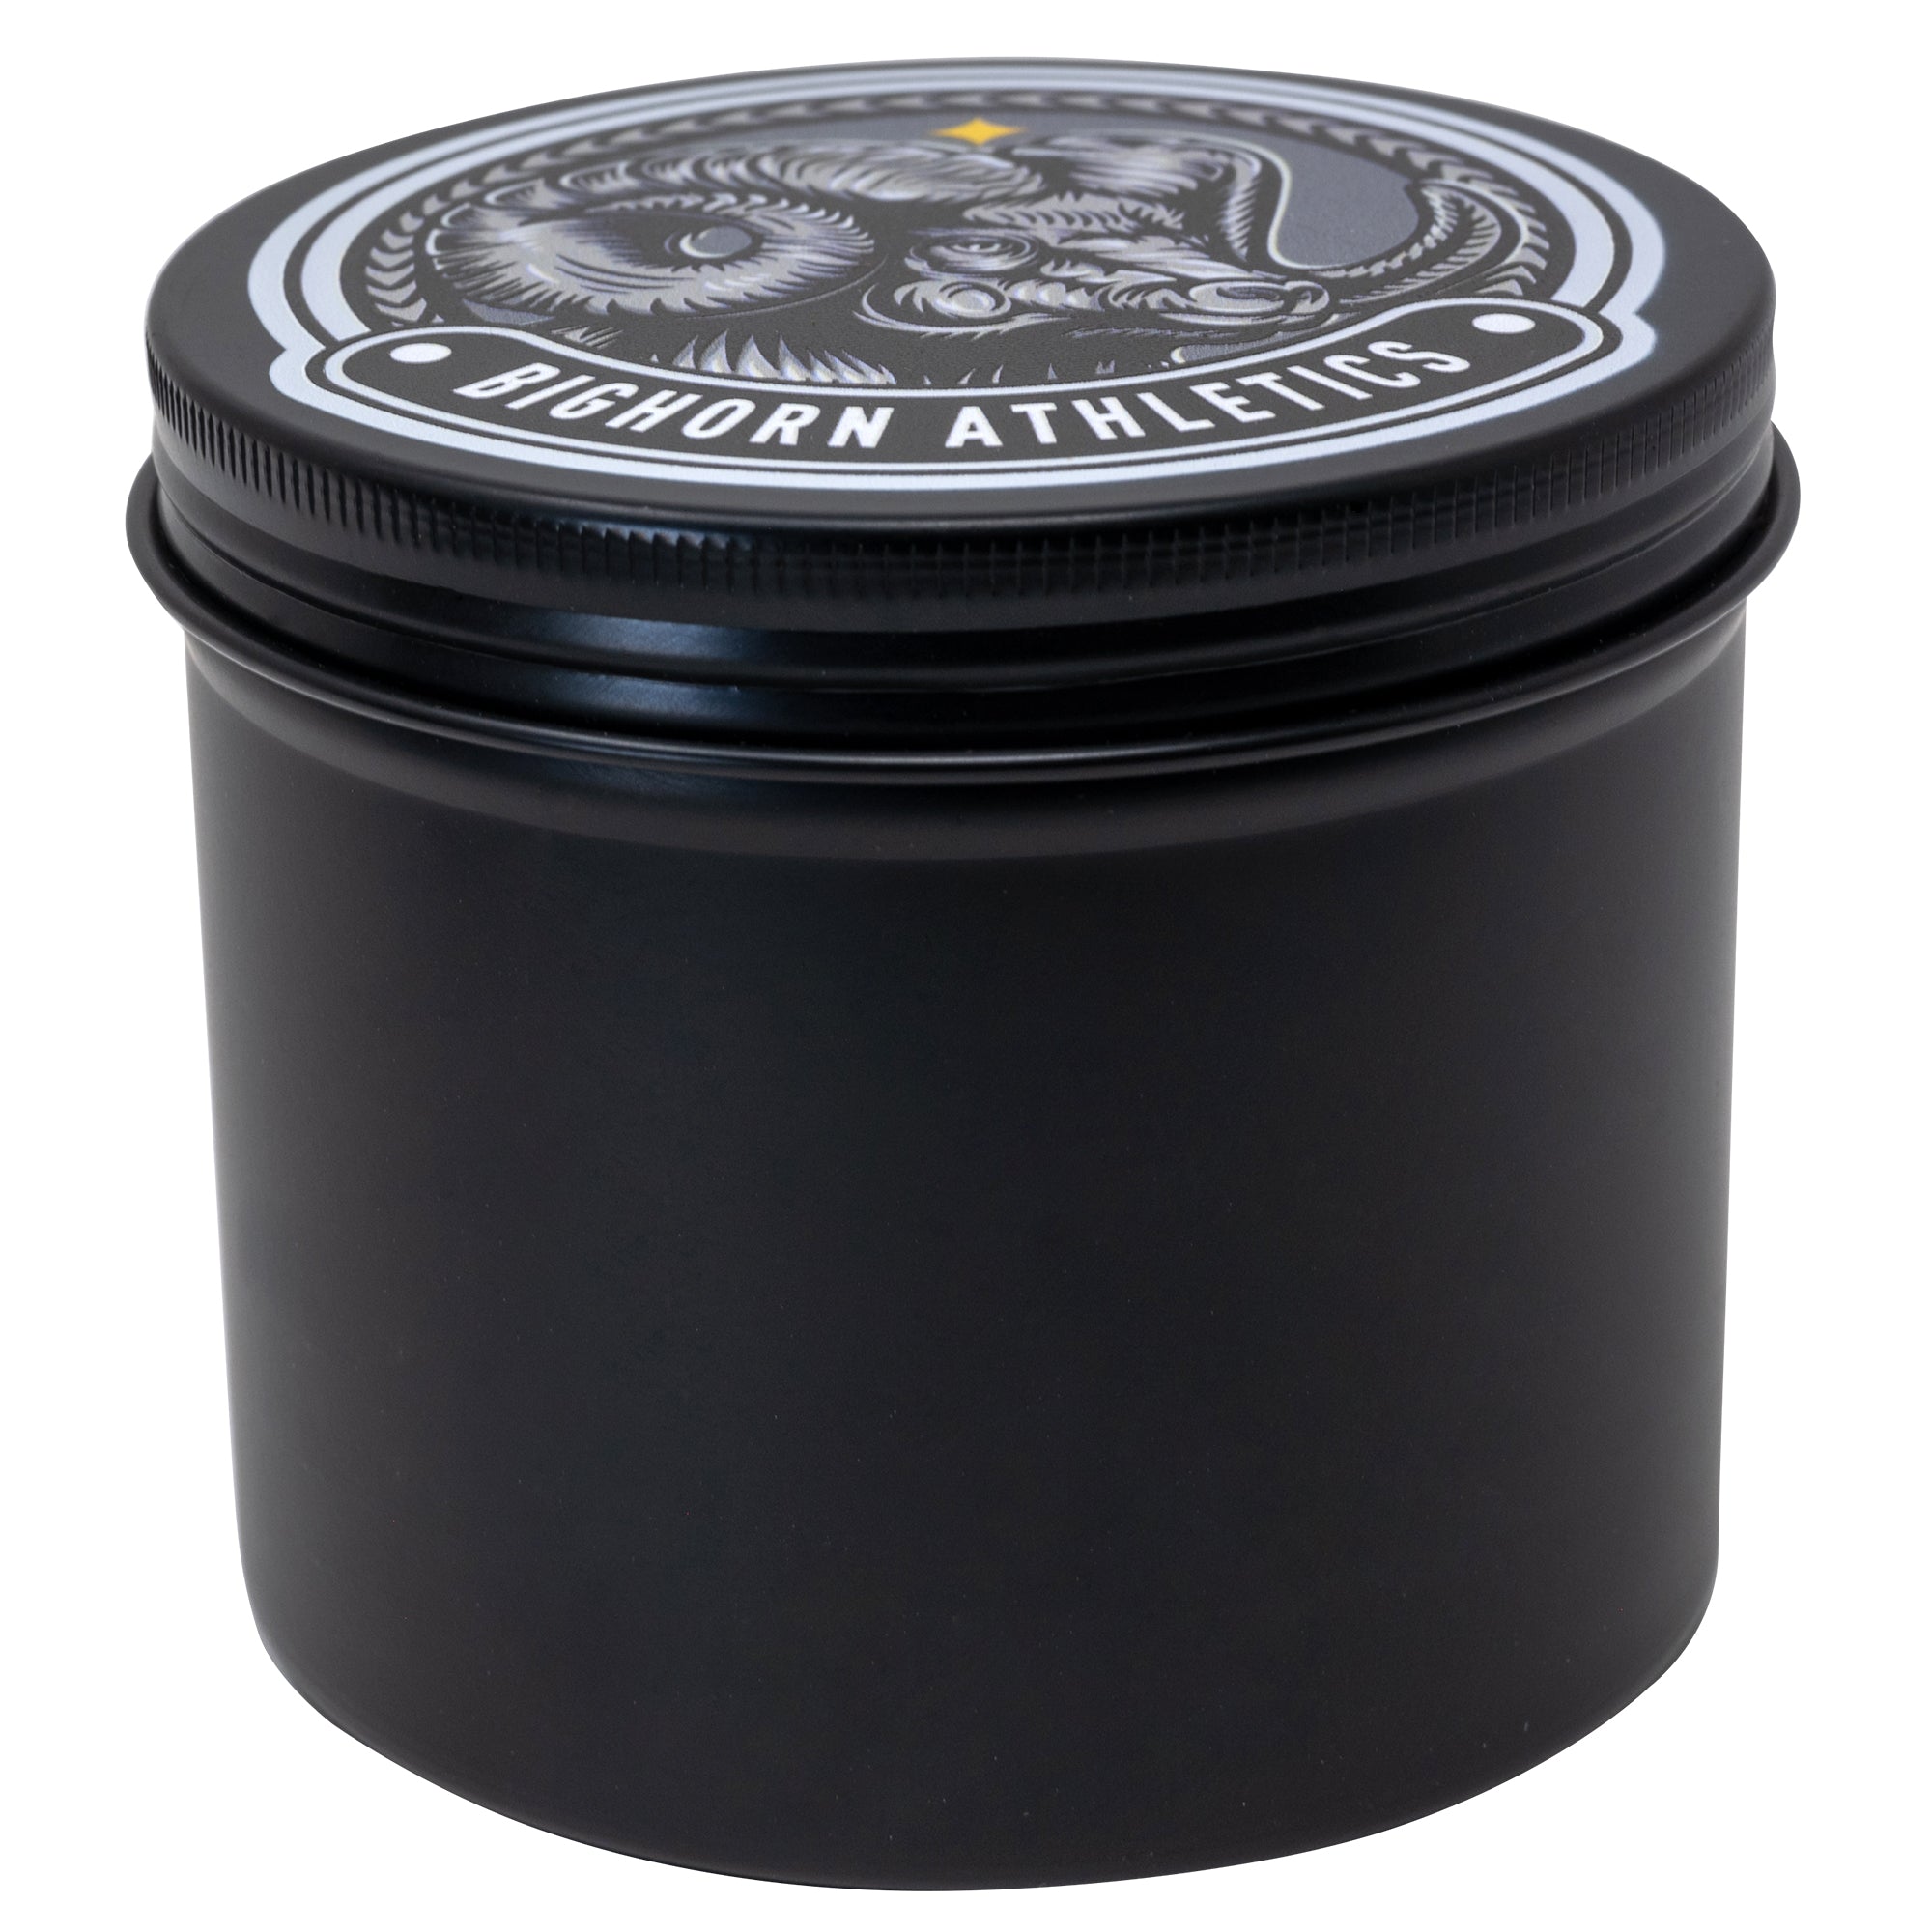 Black Tin Can Holder, Medium - Tape Not Included